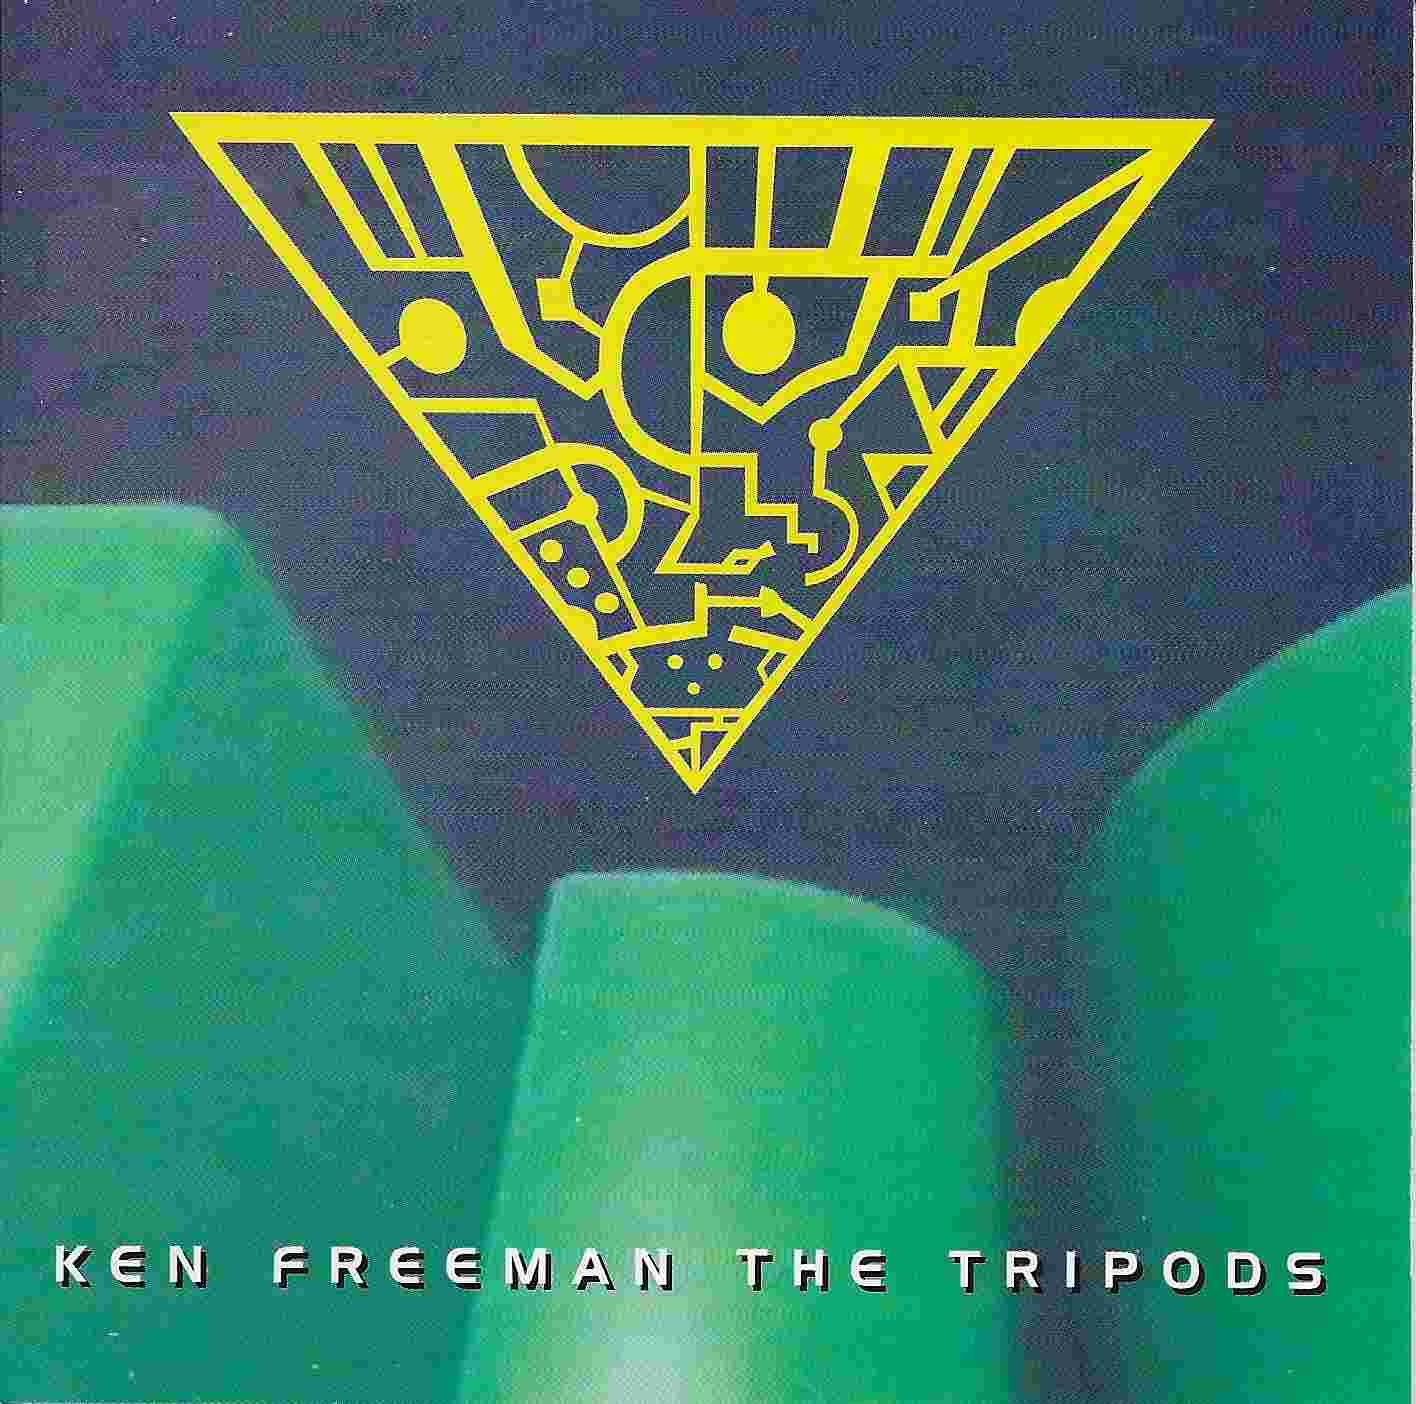 Picture of The tripods by artist Ken Freeman from the BBC cds - Records and Tapes library